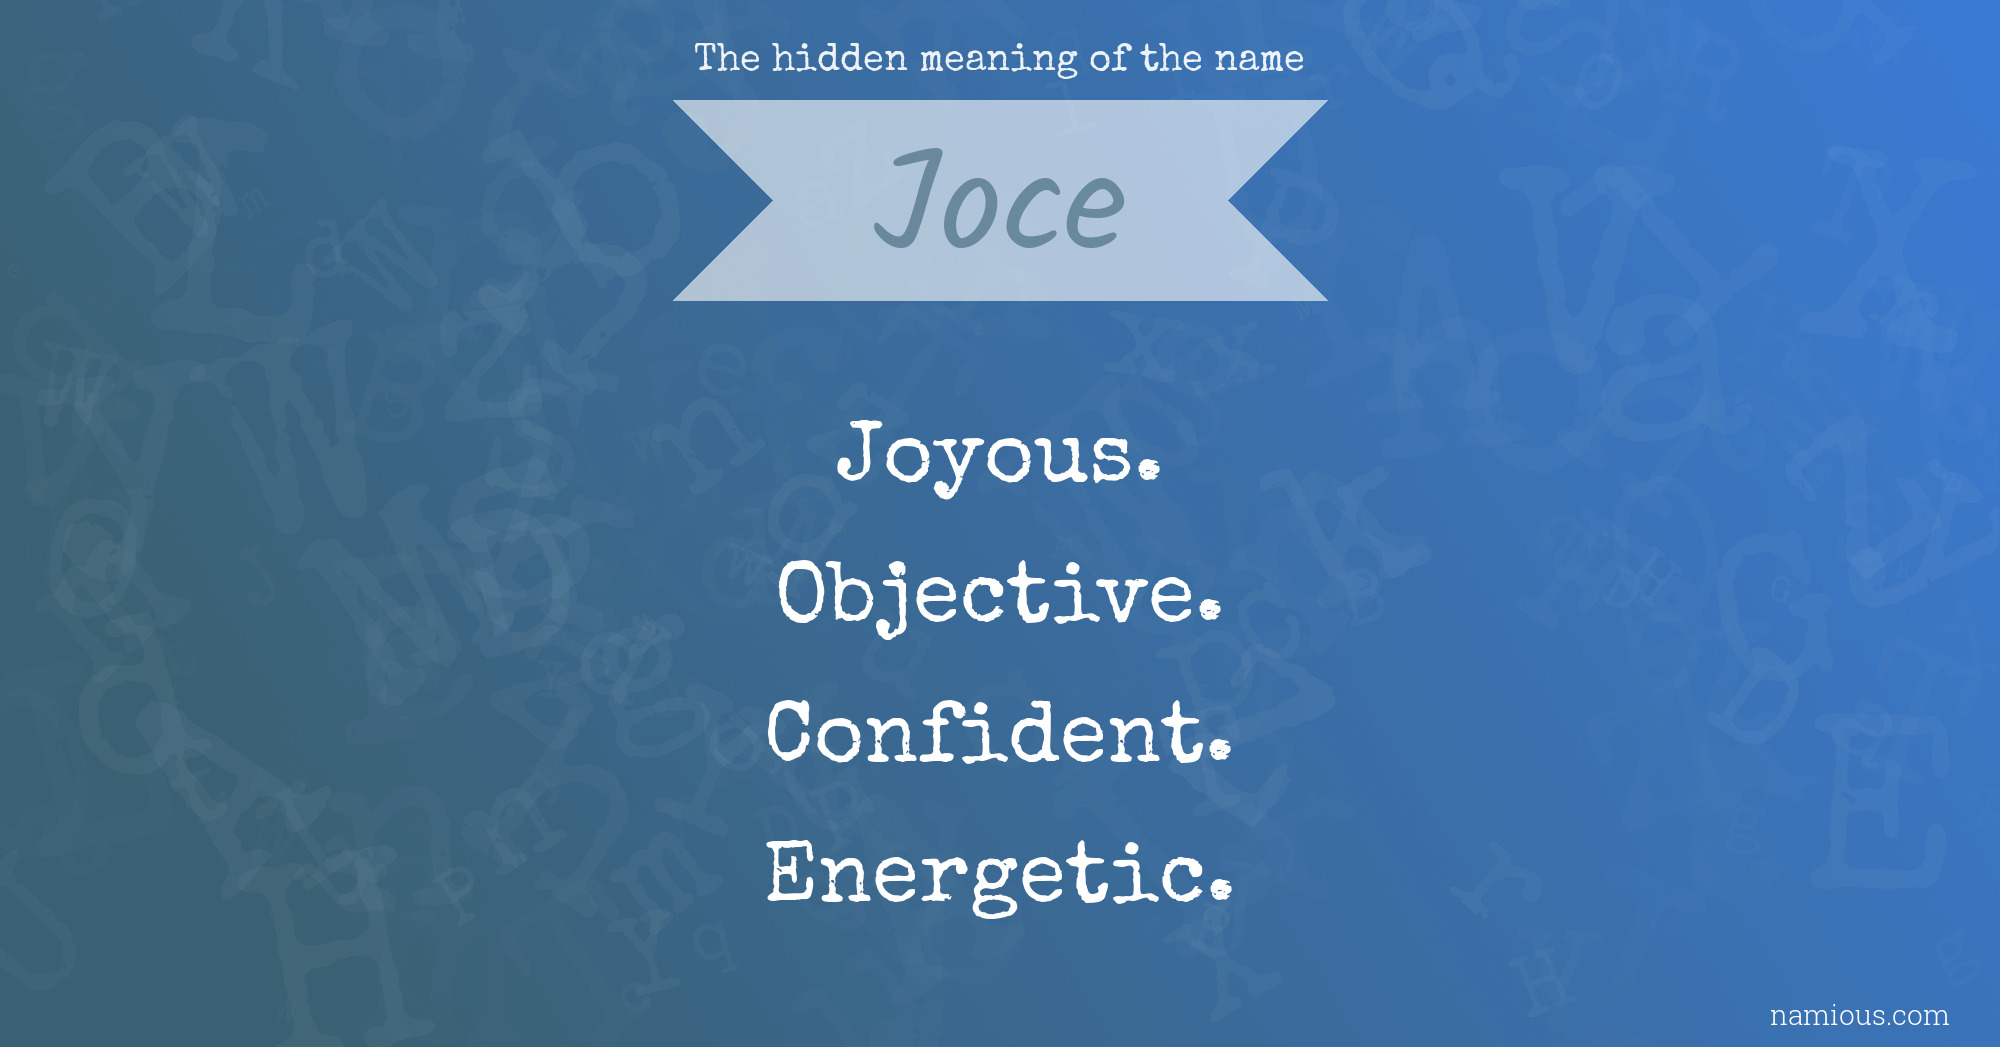 The hidden meaning of the name Joce